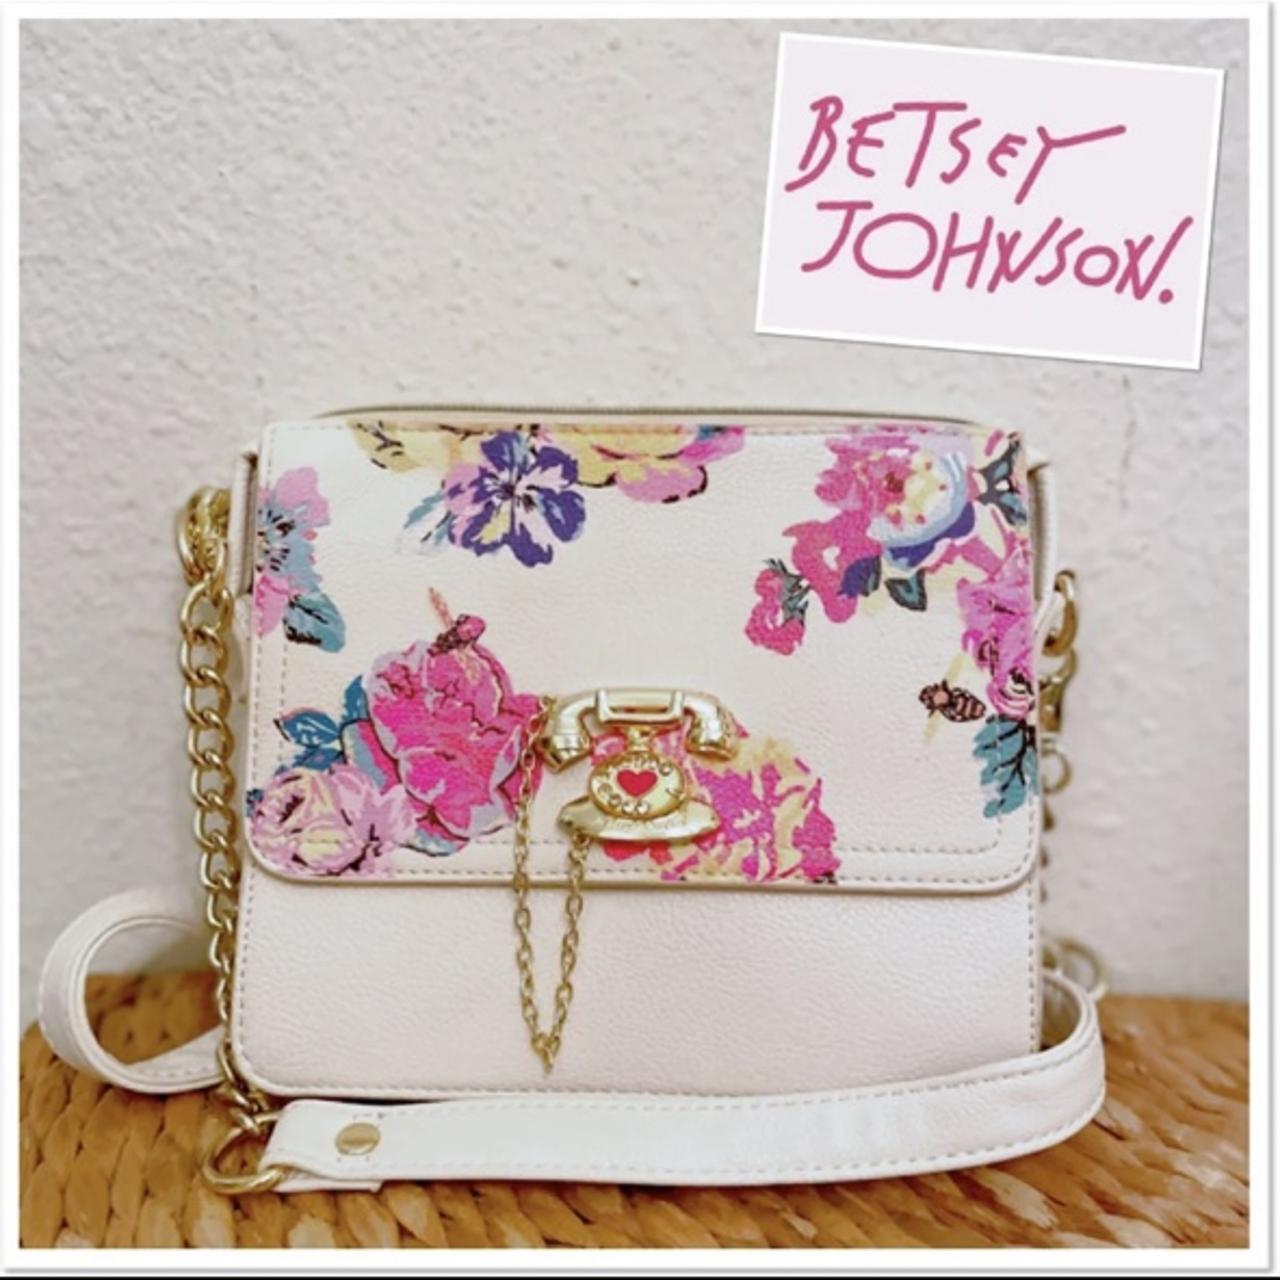 Betsey Johnson Phone Tag Kitsch Pay Phone (Works!) Crossbody, Iridescent  Multi | Accessorising - Brand Name / Designer Handbags For Carry & Wear...  Share If You… | Betsey johnson, Betsey johnson purses, Pay phone